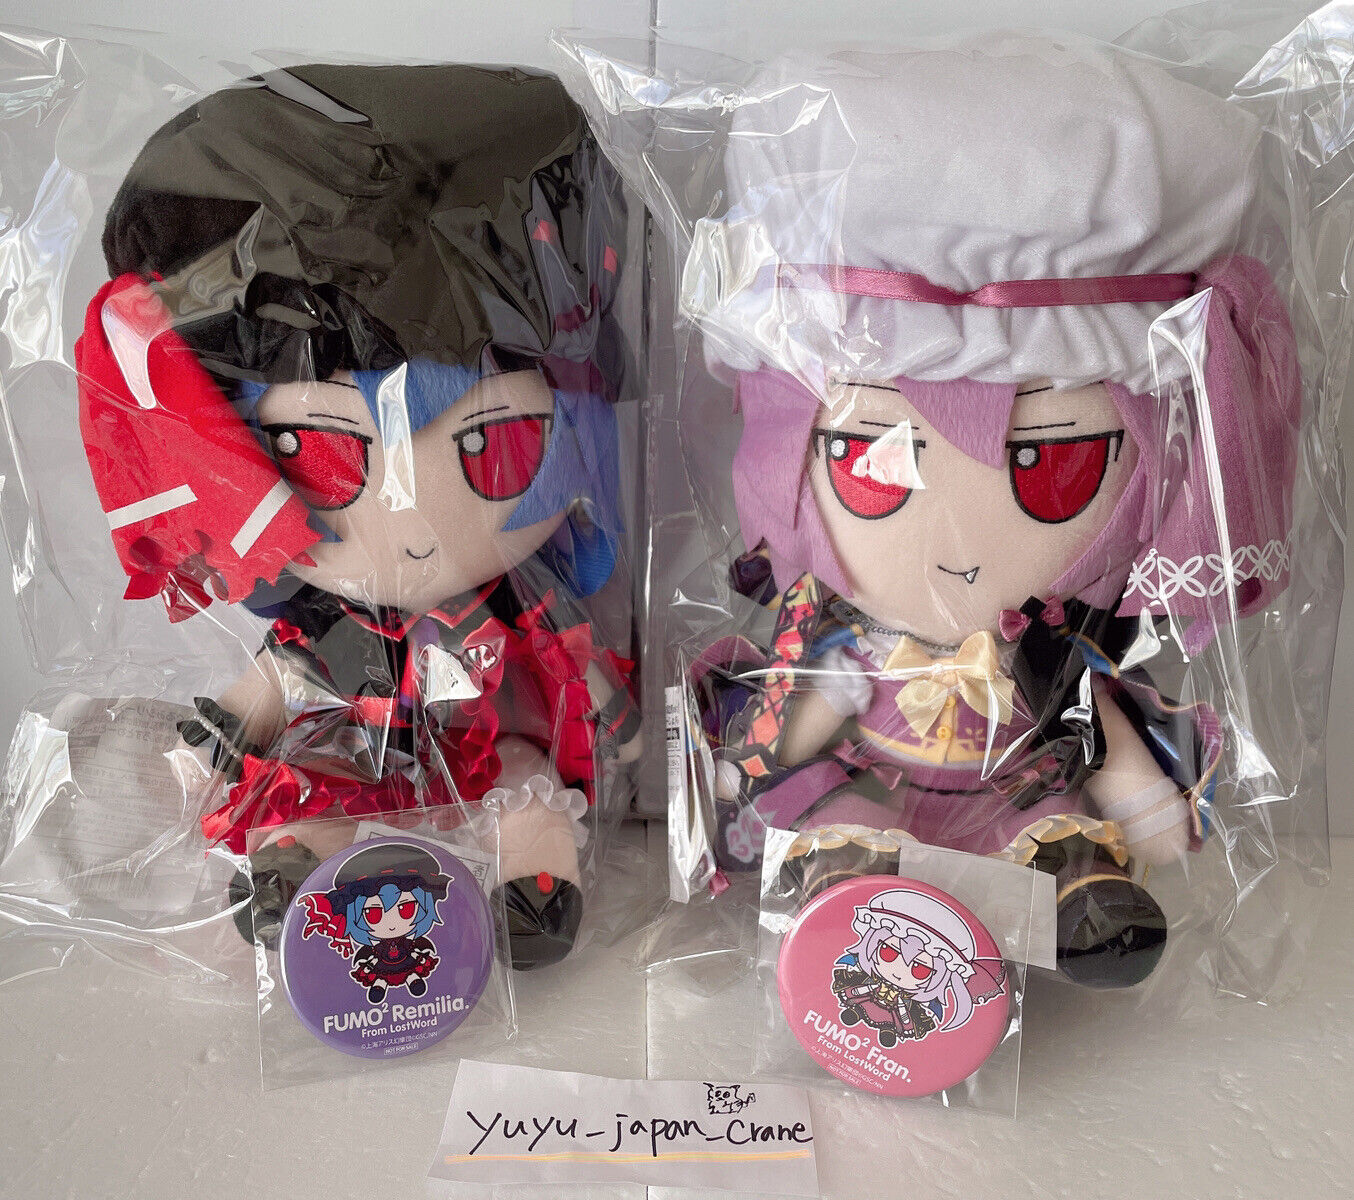 Touhou Project Scarlet Plush Doll Fumo Fumo Fran Remilia From LostWord 2 Type